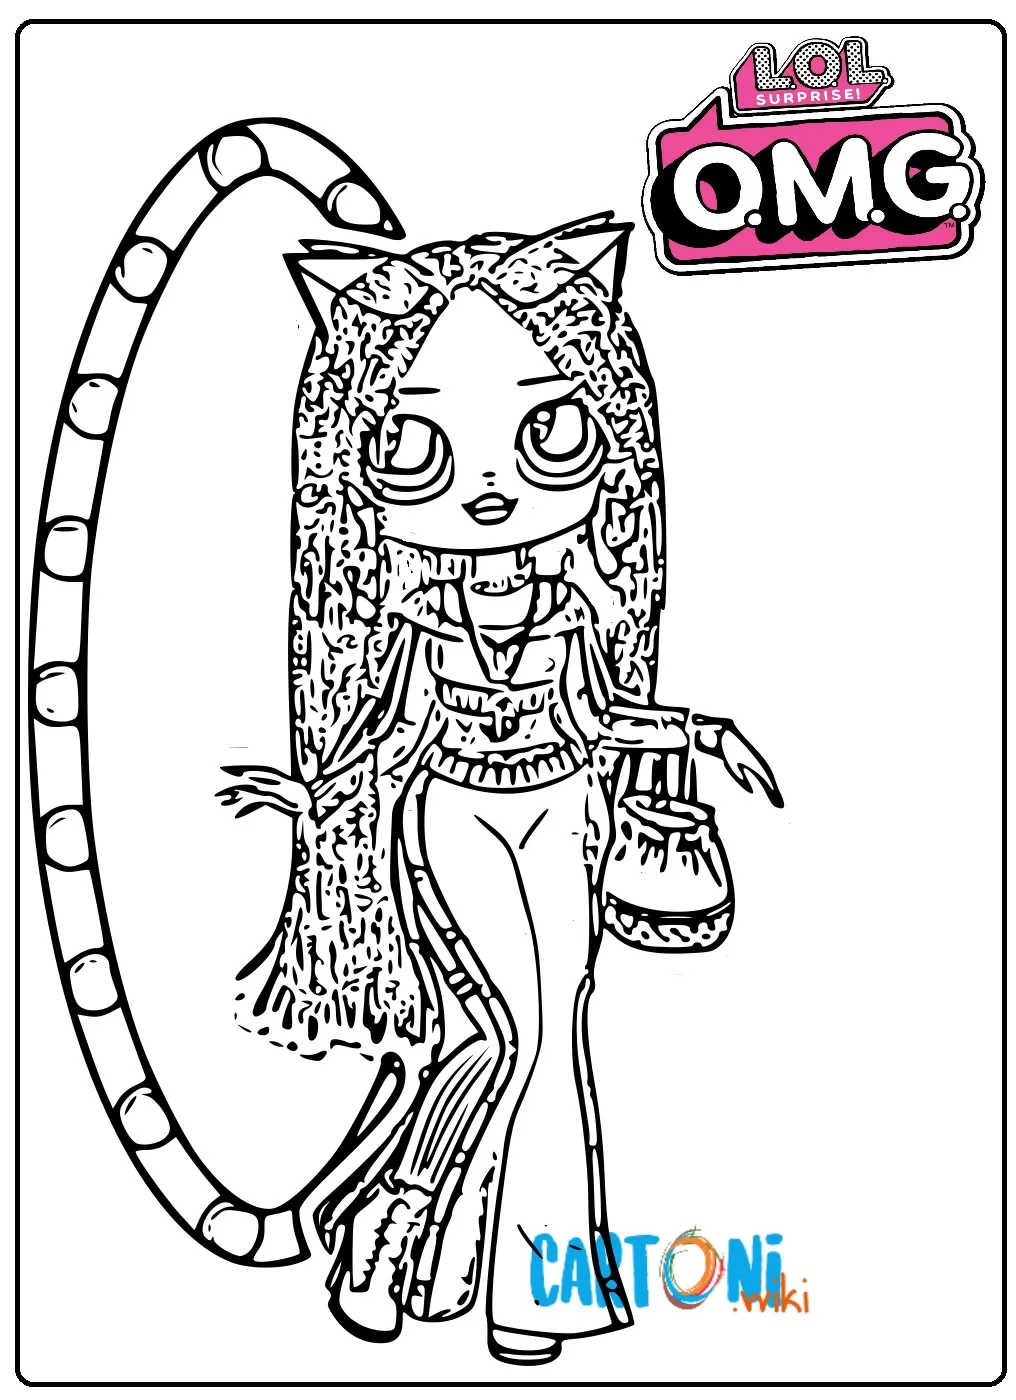 Swag Lol Surprise omg coloring pages